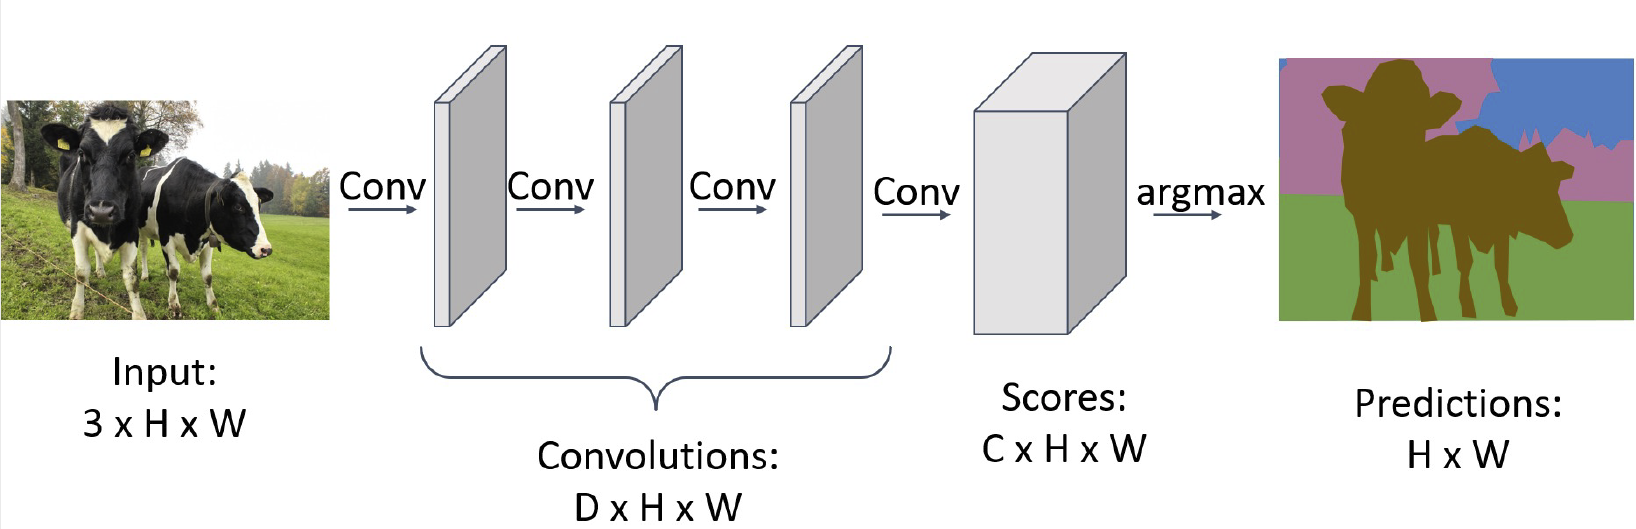 fully_convolutional_network.png